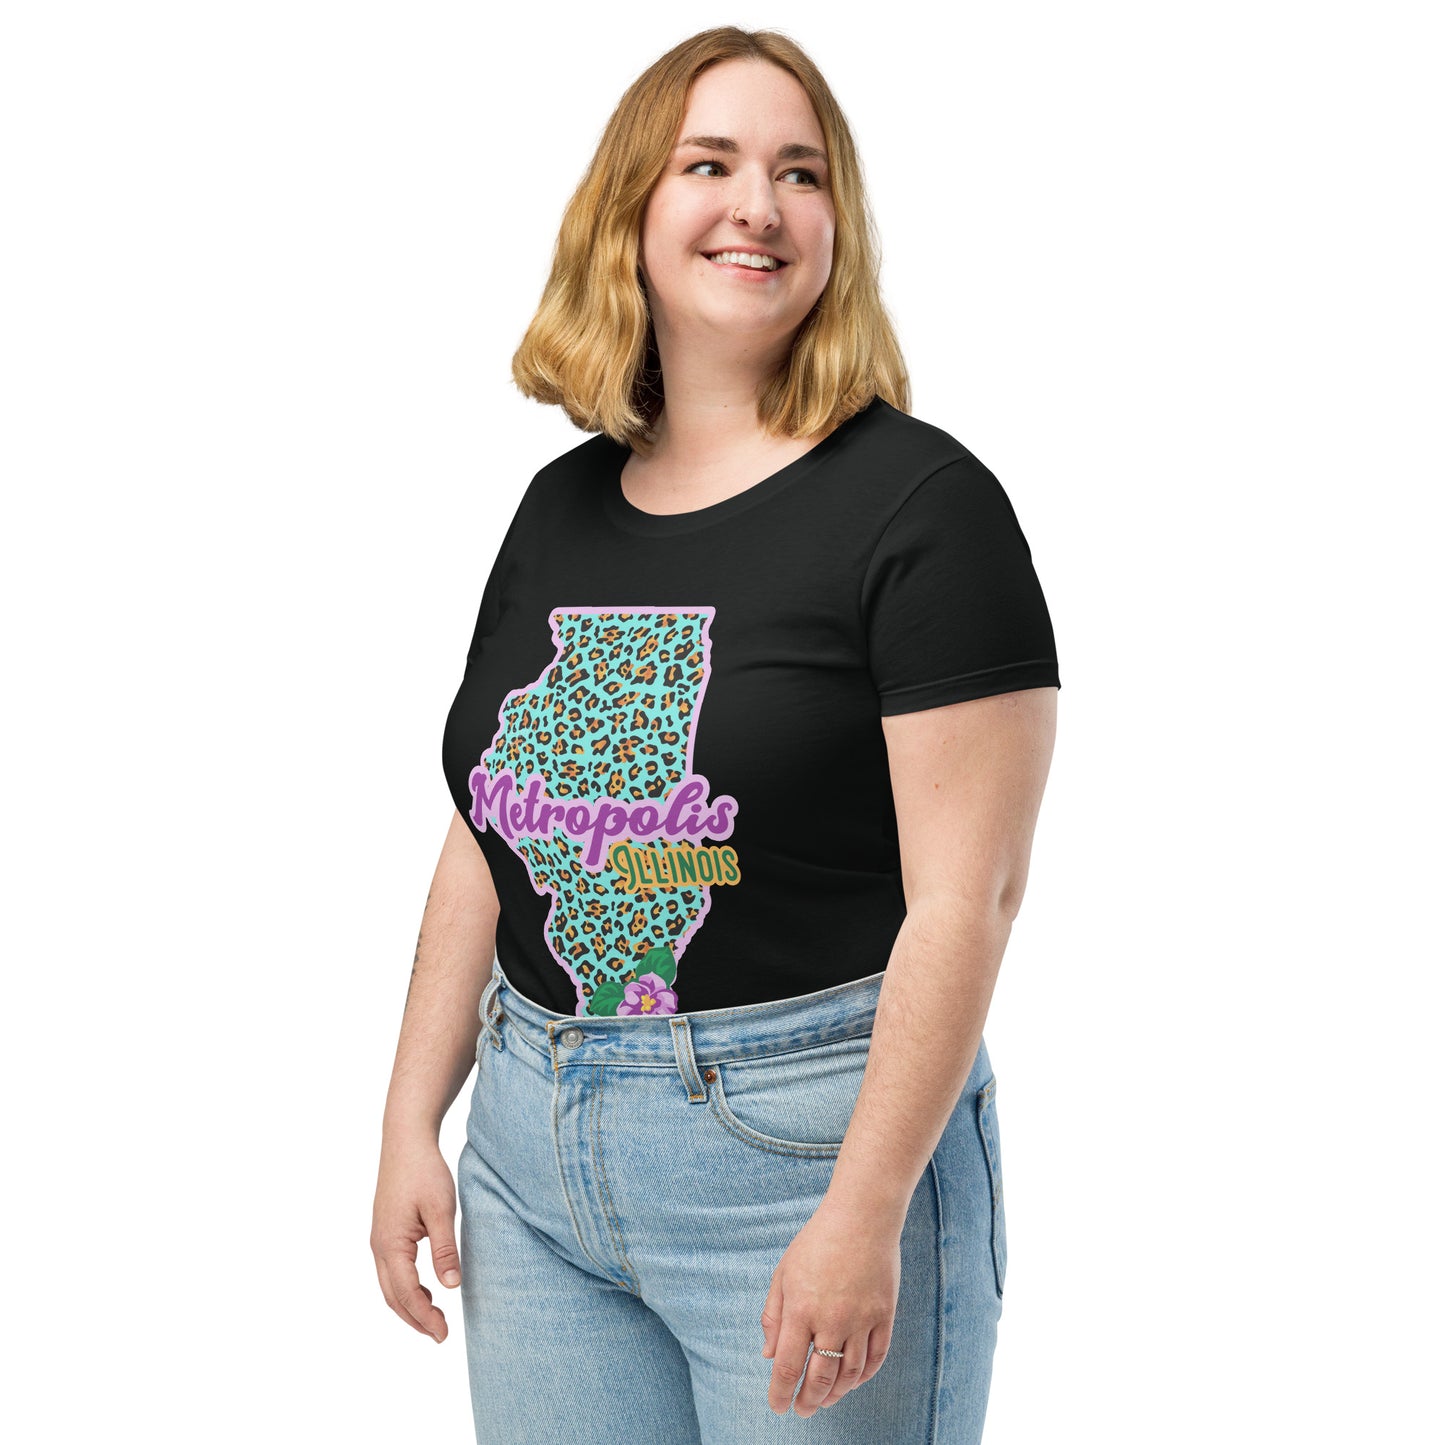 Metropolis Illinois State Flower Over Leopard Print Women’s fitted Shirt